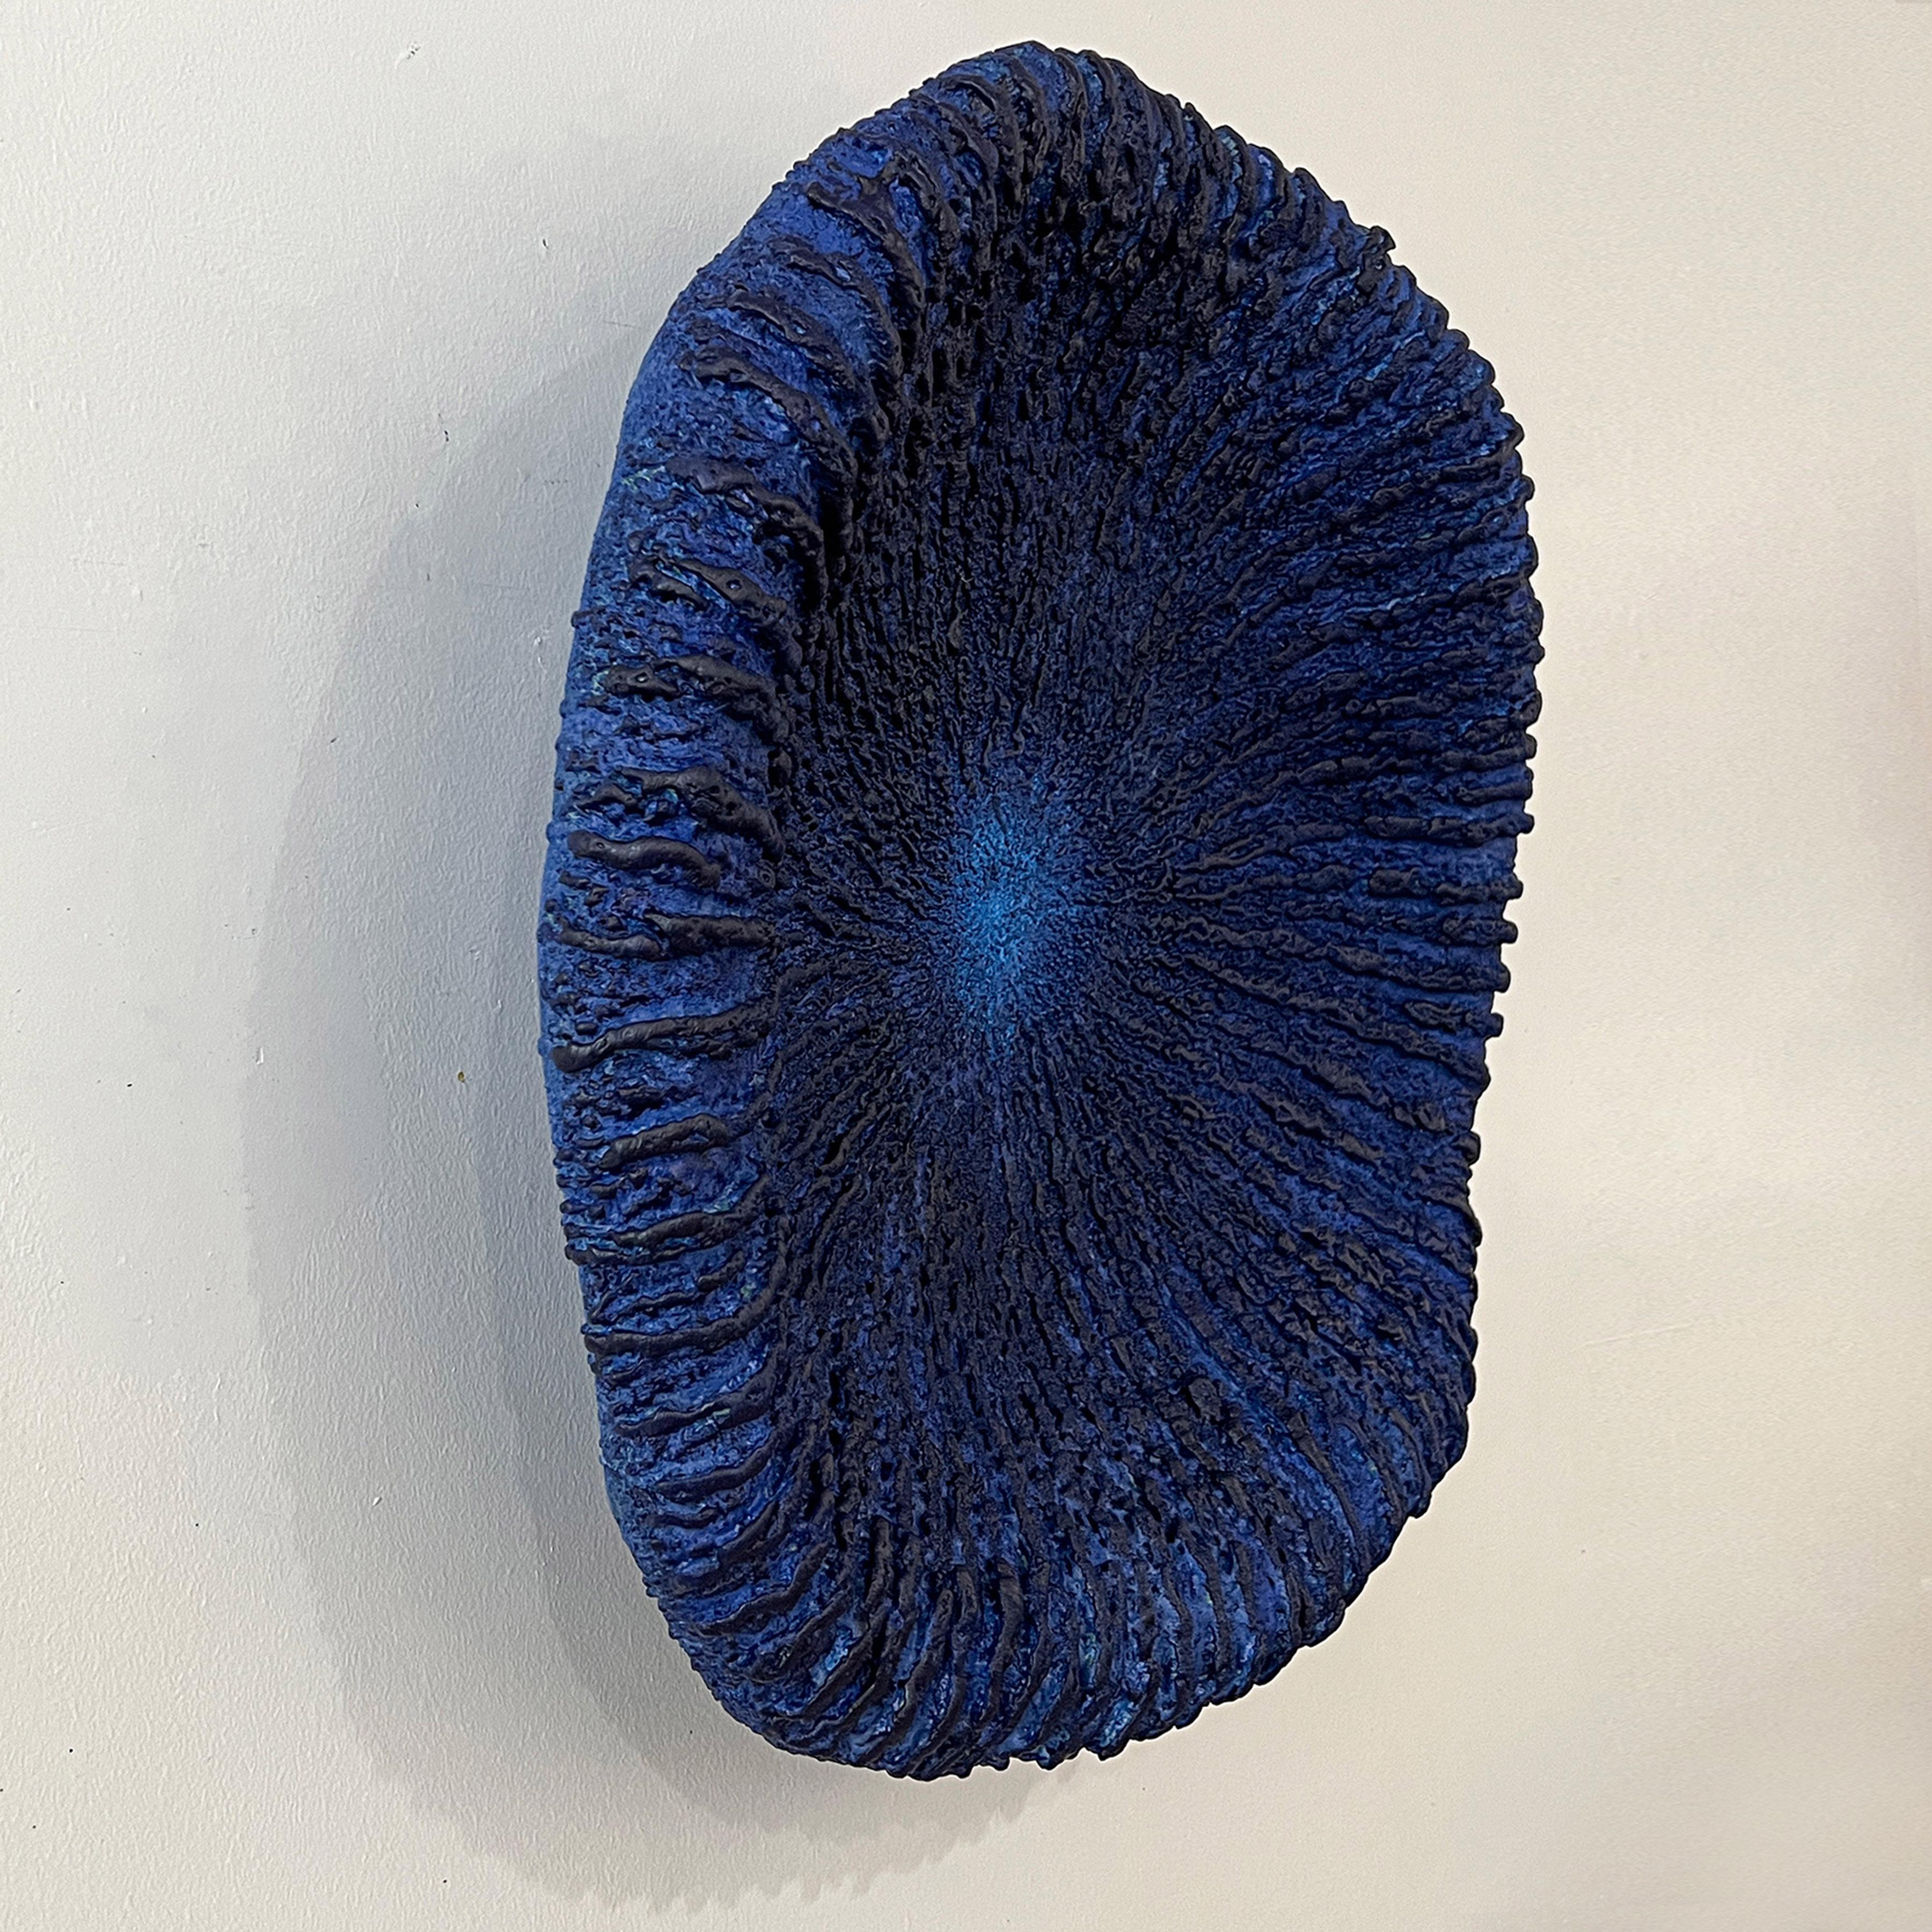 This minimalist blue 3D wall piece is by Barry Katz. He creates pieces that allude to the artist looking into a mirror. And in particular, one which reflects inner states. Not a mirror that flatters, far from, but one that tells inescapable truths.